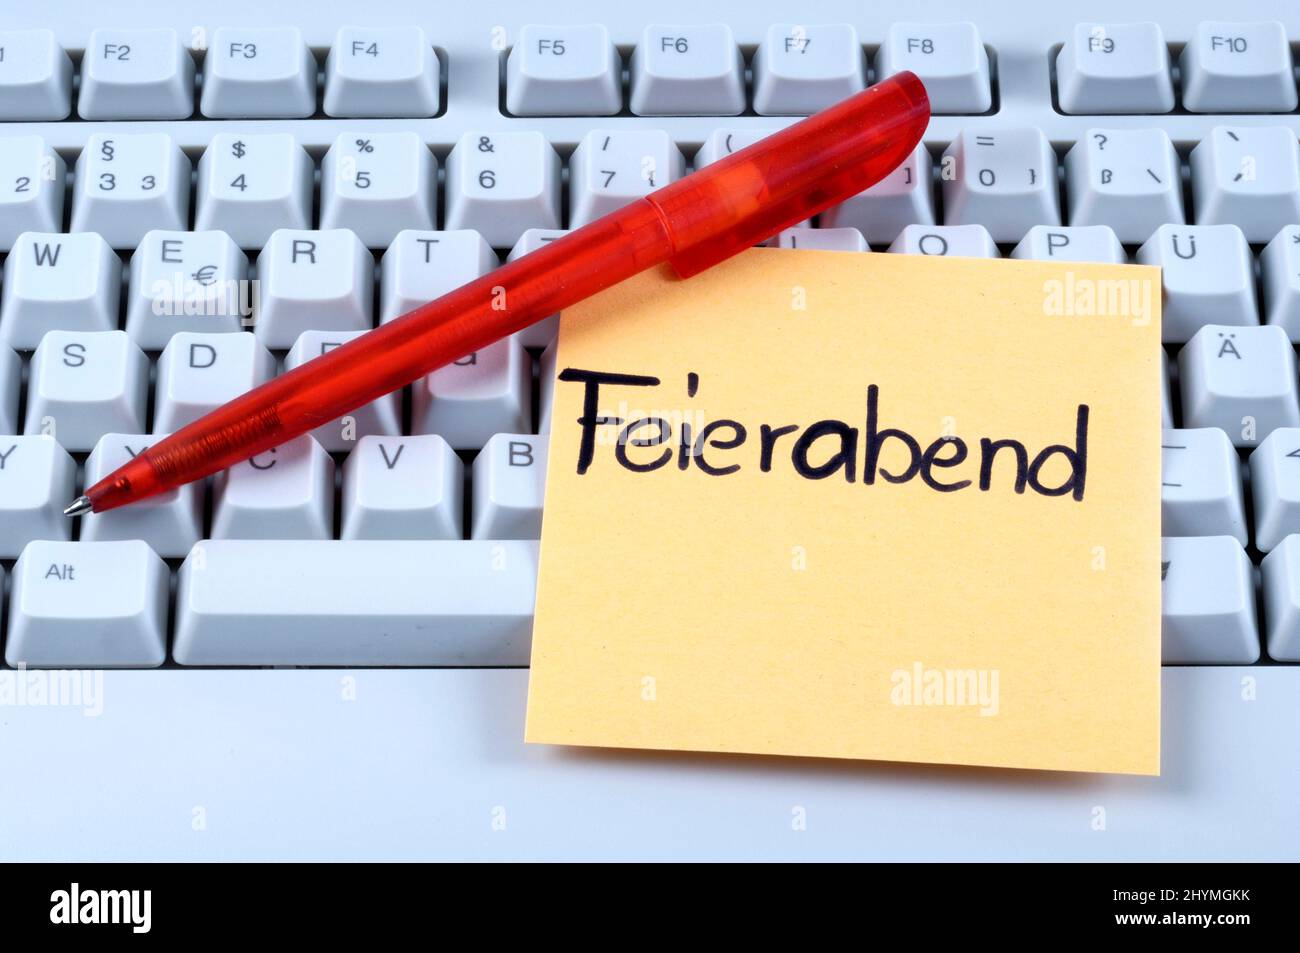 Keyboard with a message Feierabend, finishing time, Germany Stock Photo